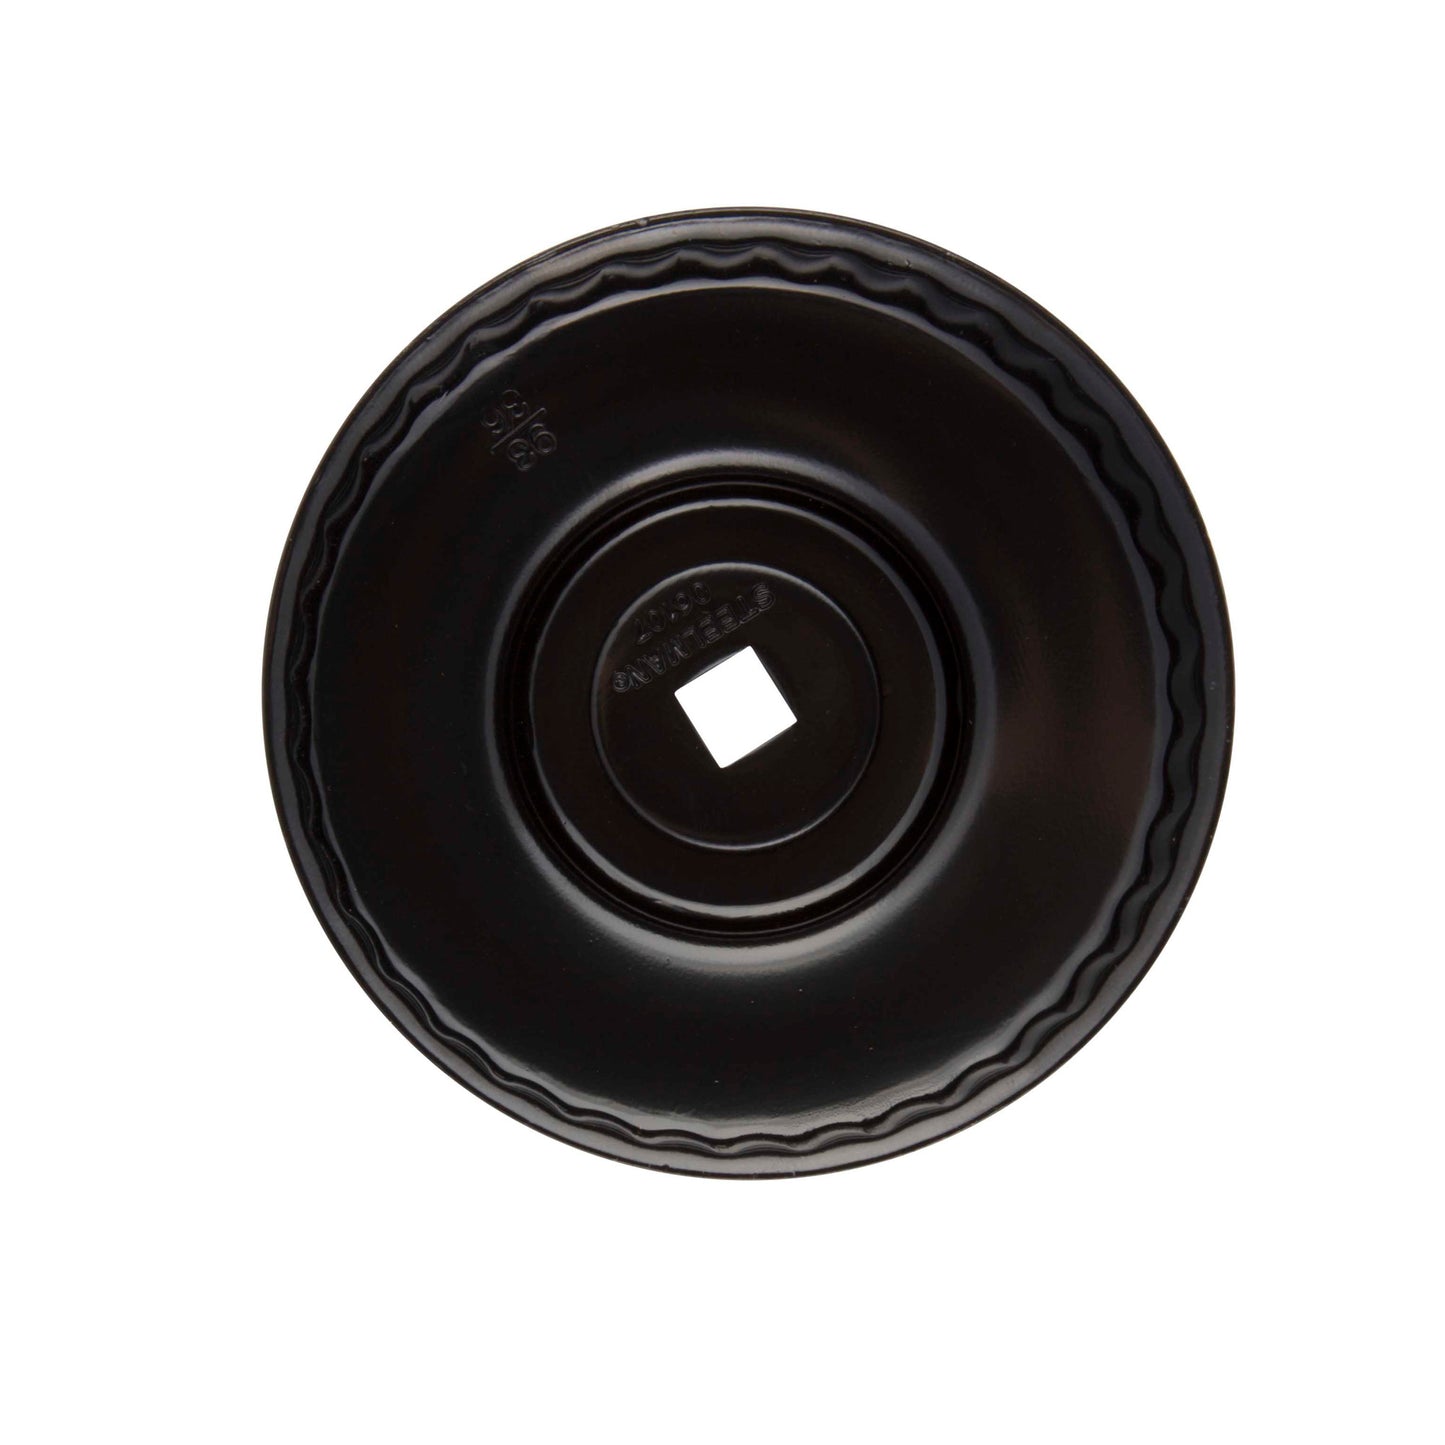 Oil Filter Cap Wrench 93mm x 36 Flute